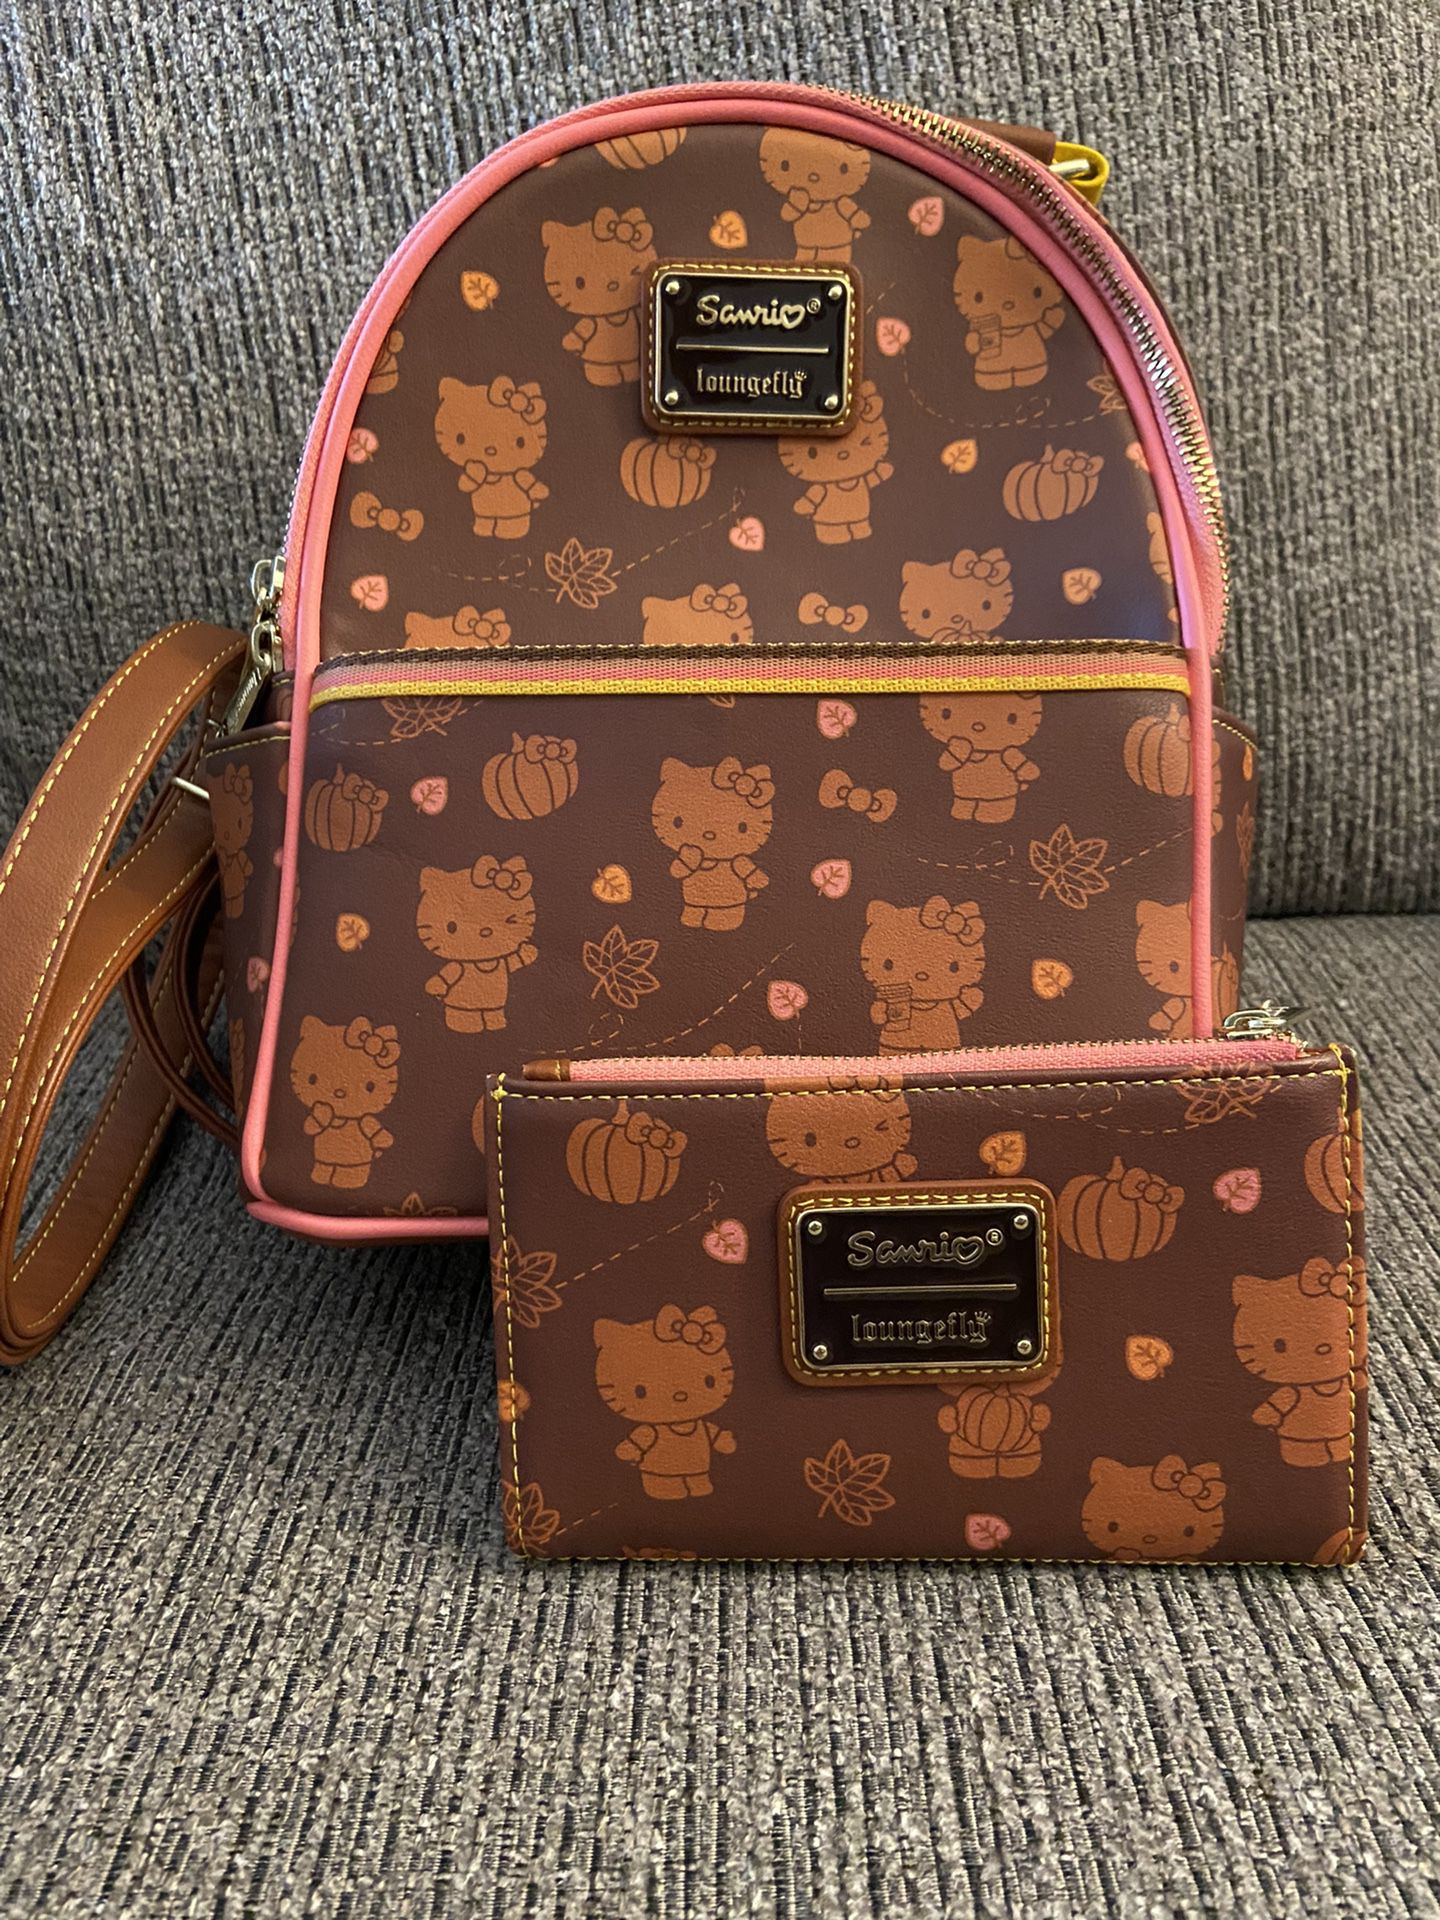 hello kitty loungefly backpack purse / wallet for Sale in Las